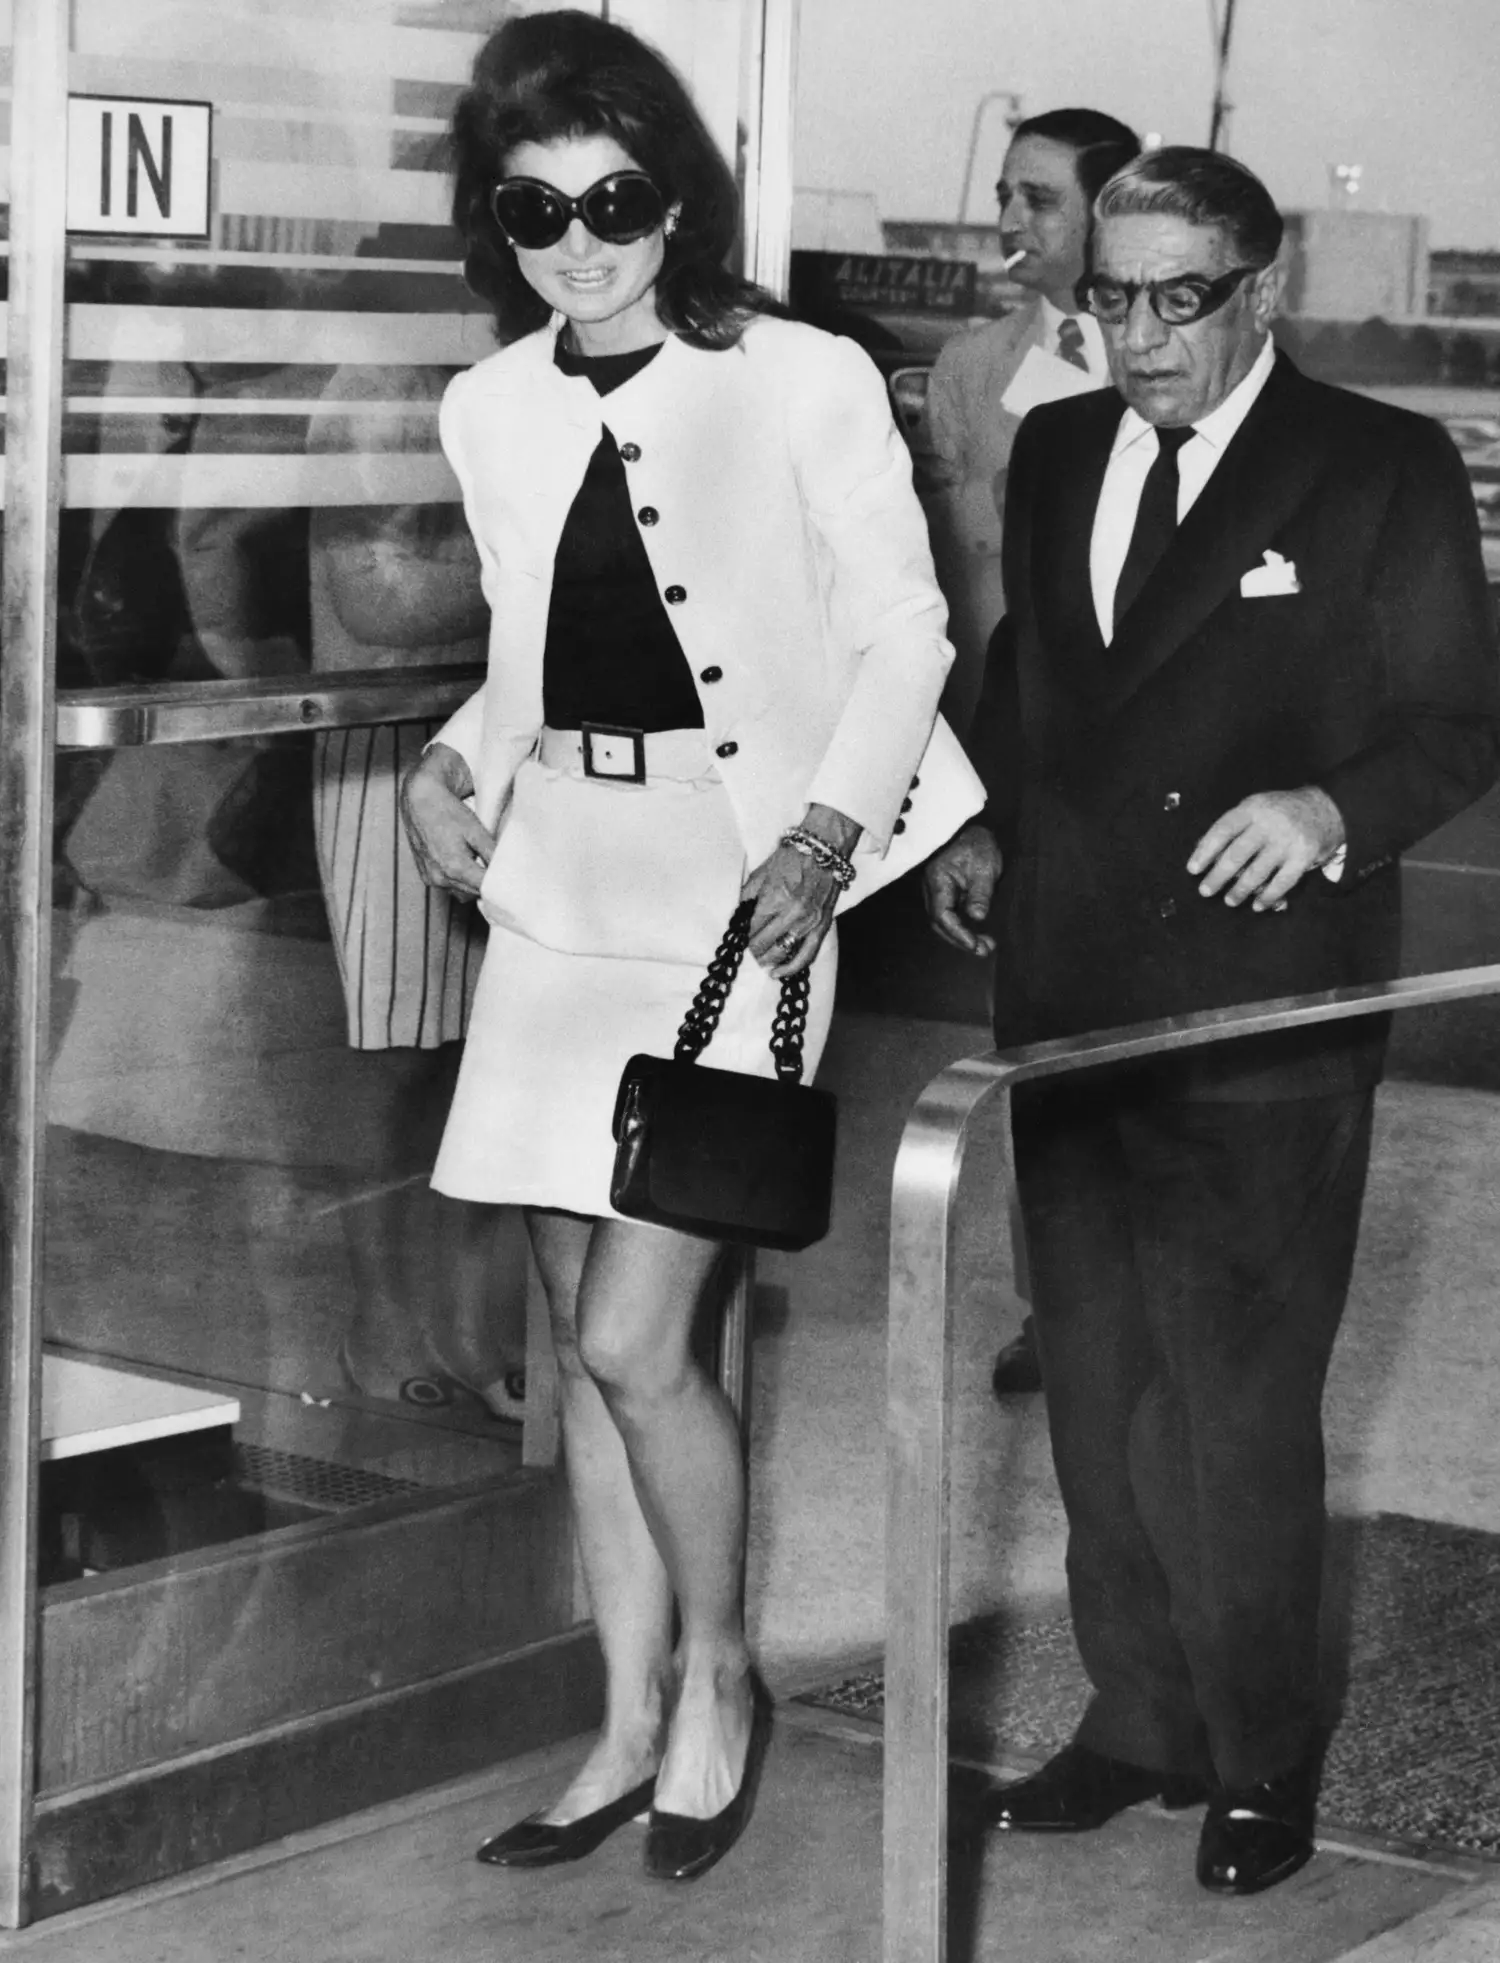 '60s Fashion Skirt Suit on Jacqueline Kennedy Onassis